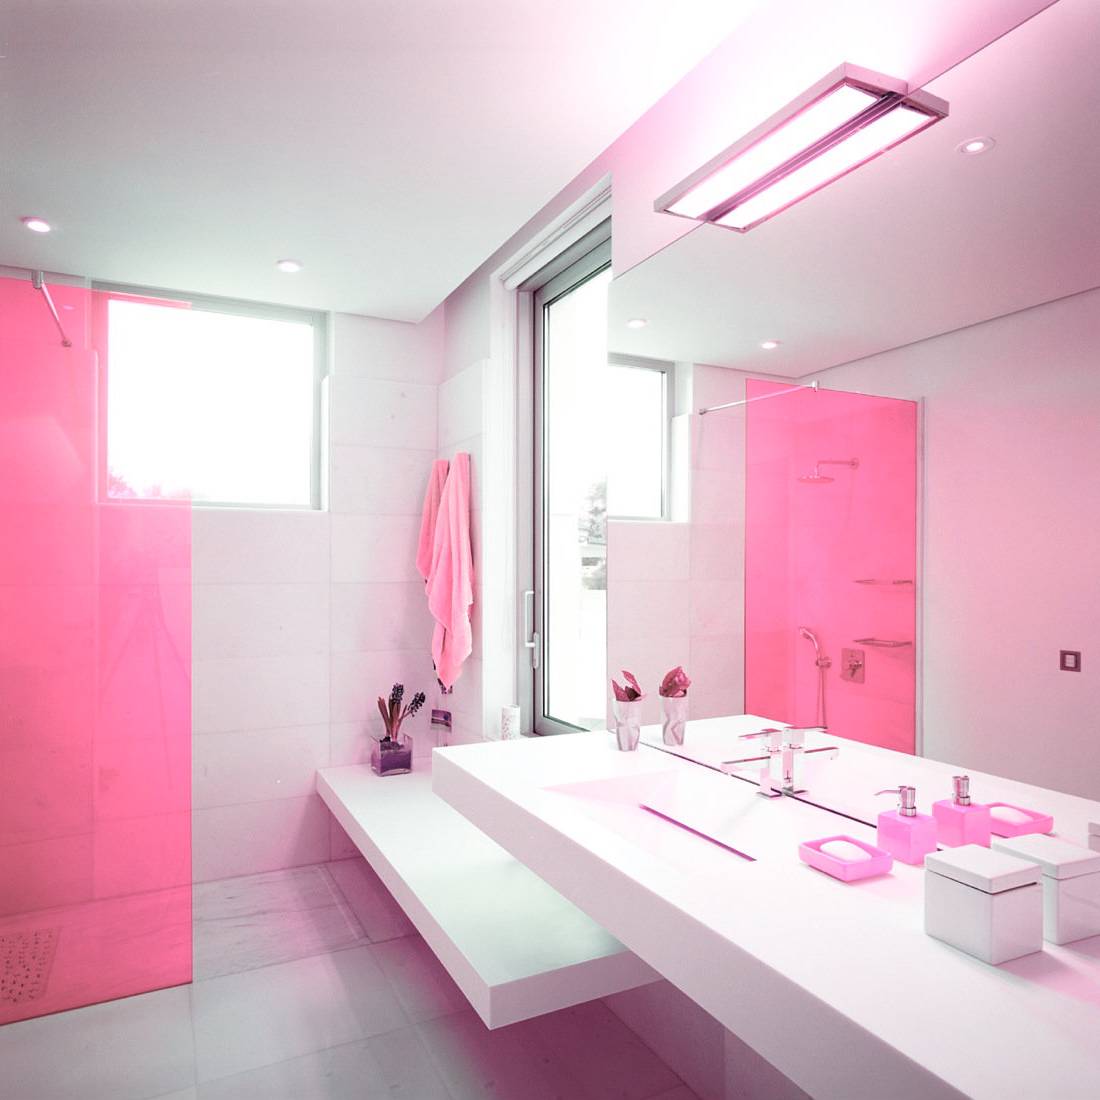 Interior Design Of Bathroom With Pink Ideas WithLarge Mirror Simple Ceiling And Lighting White Wash Basin Faucet Pink Hand Soap FLower Window Towel And Amazing Floor Bathroom